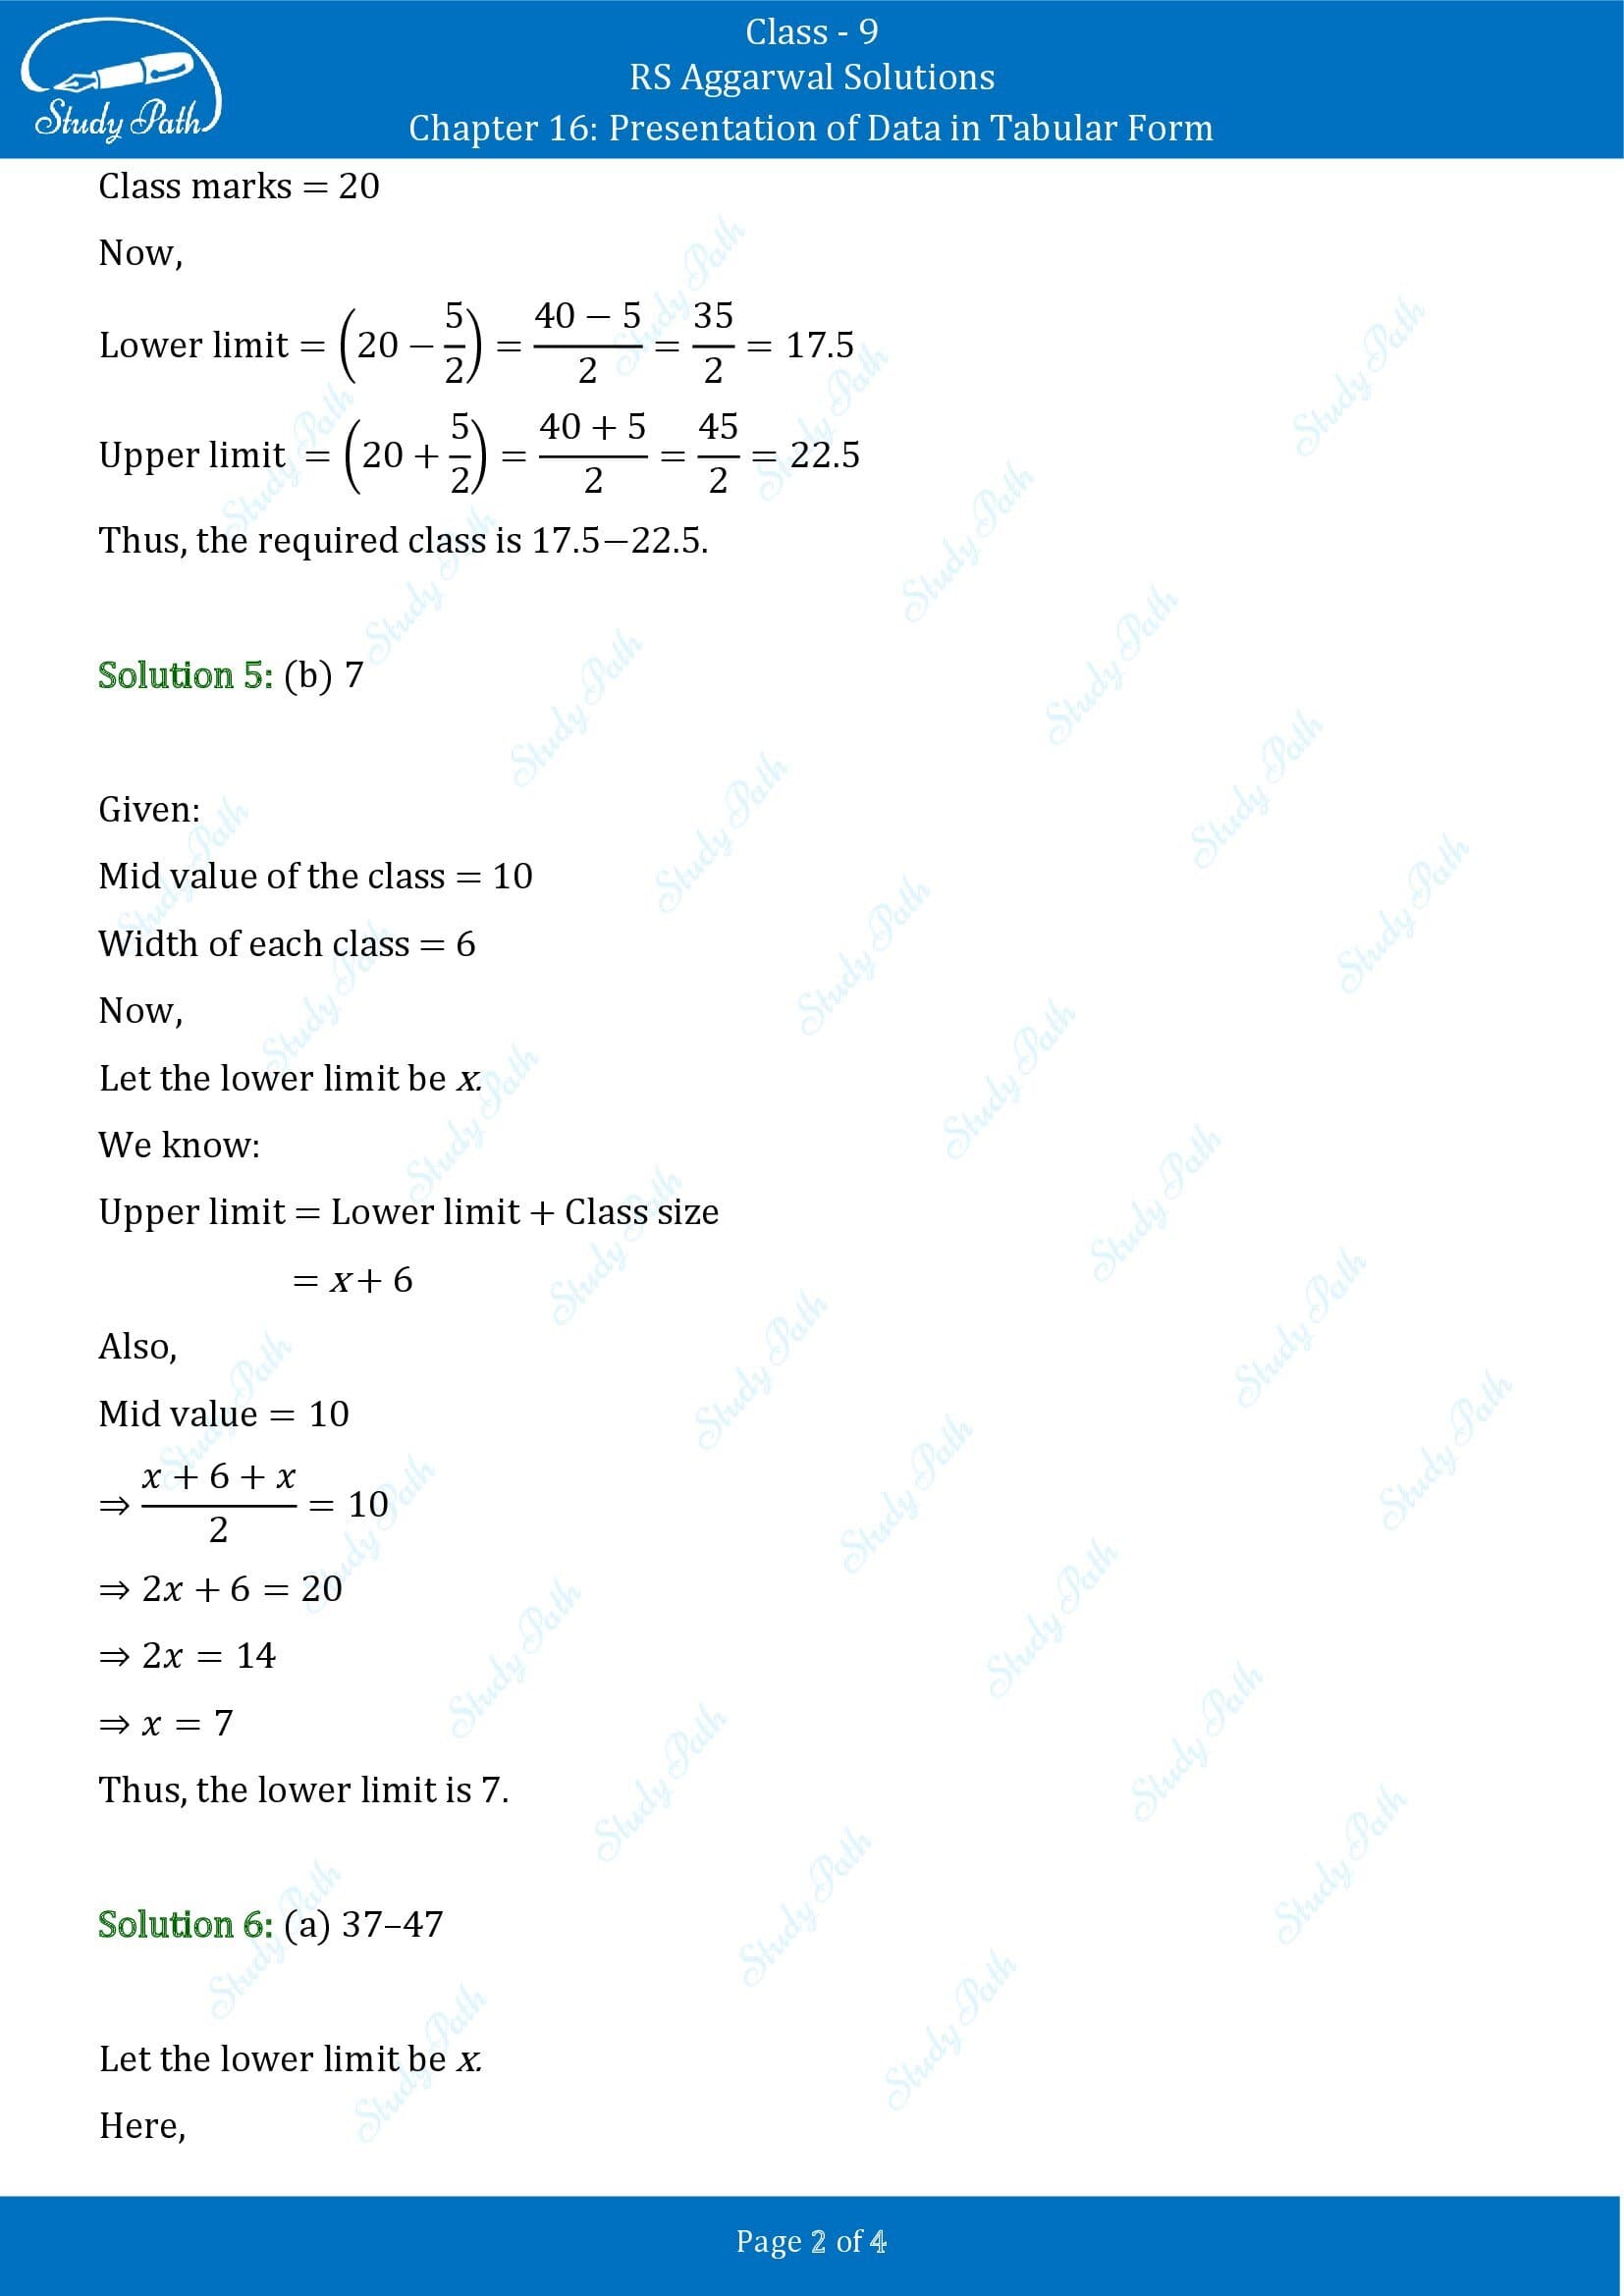 RS Aggarwal Solutions Class 9 Chapter 16 Presentation Of Data In Tabular Form Multiple Choice Questions MCQs 0002